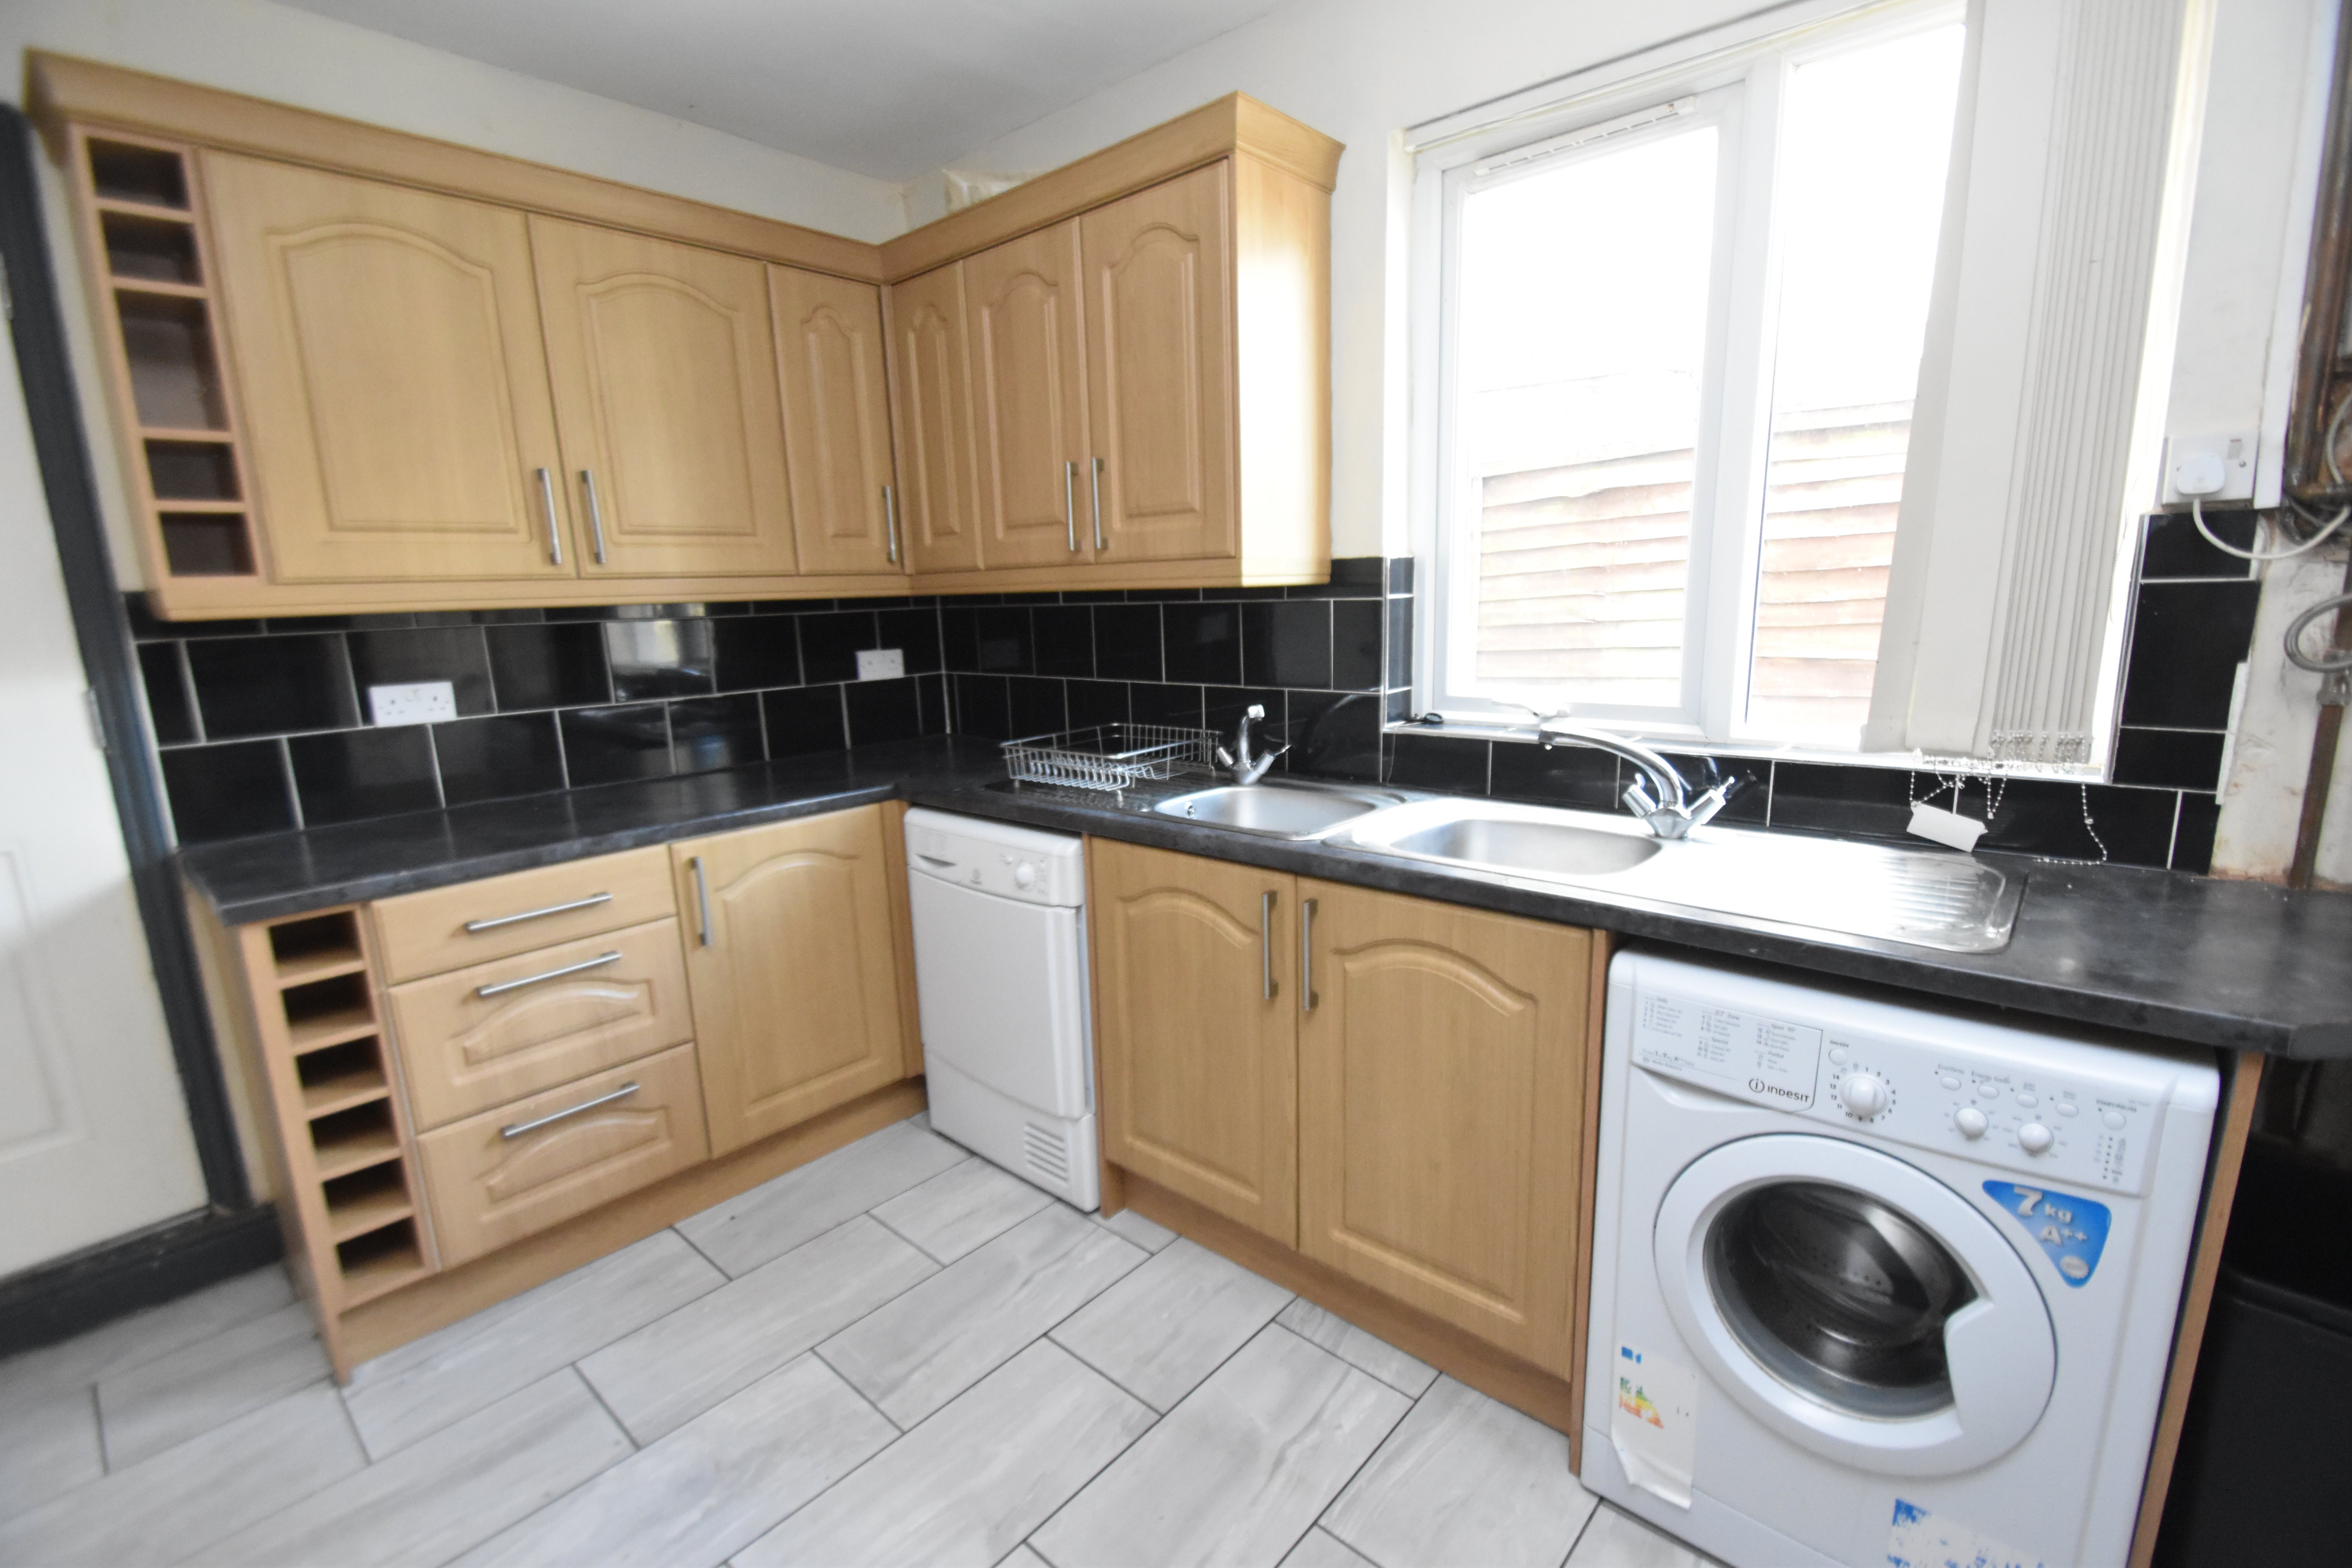 8 bed house to rent in Harriet Street, CATHAYS 13